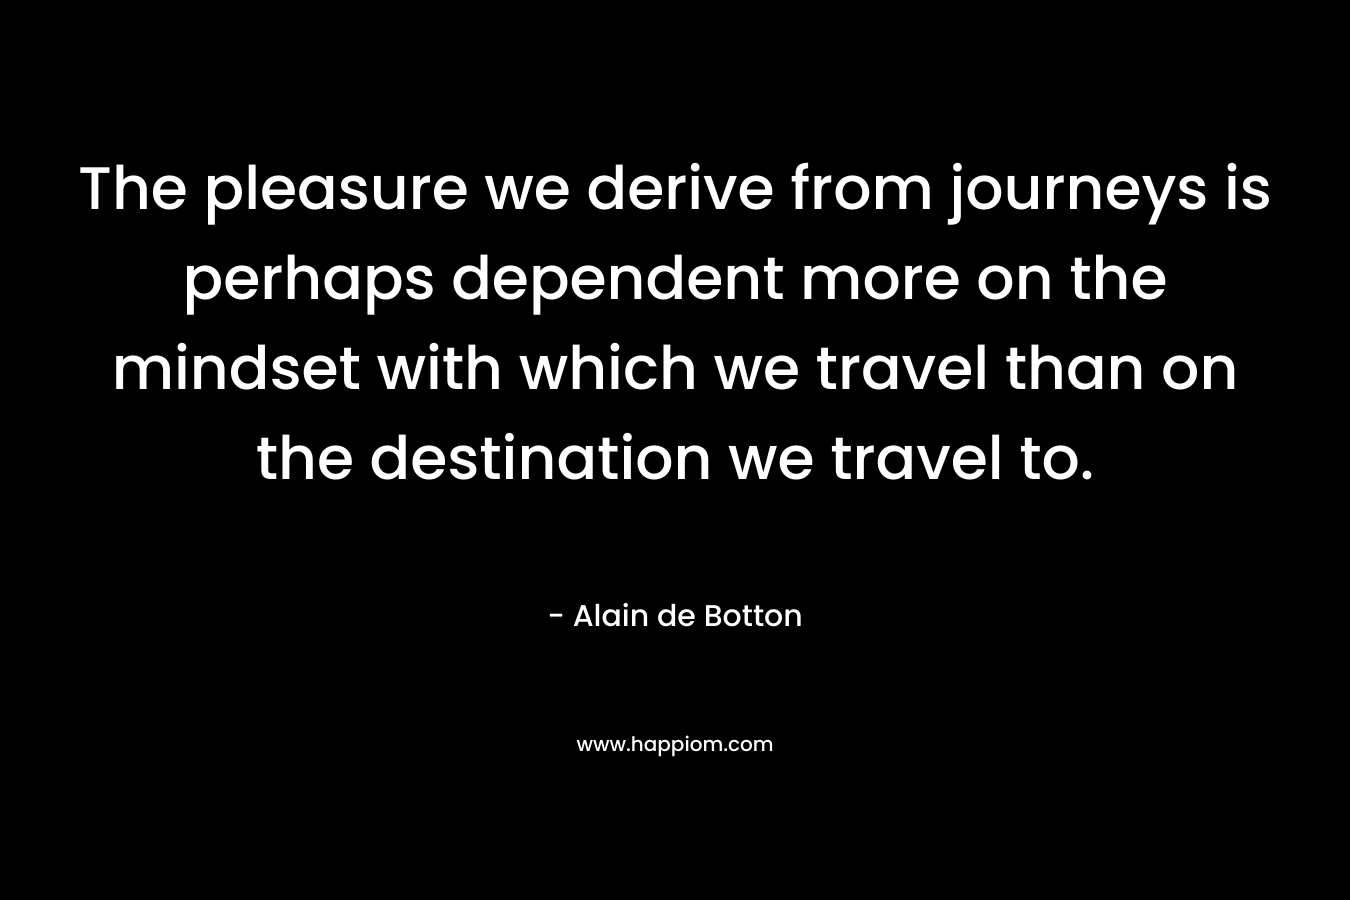 The pleasure we derive from journeys is perhaps dependent more on the mindset with which we travel than on the destination we travel to.